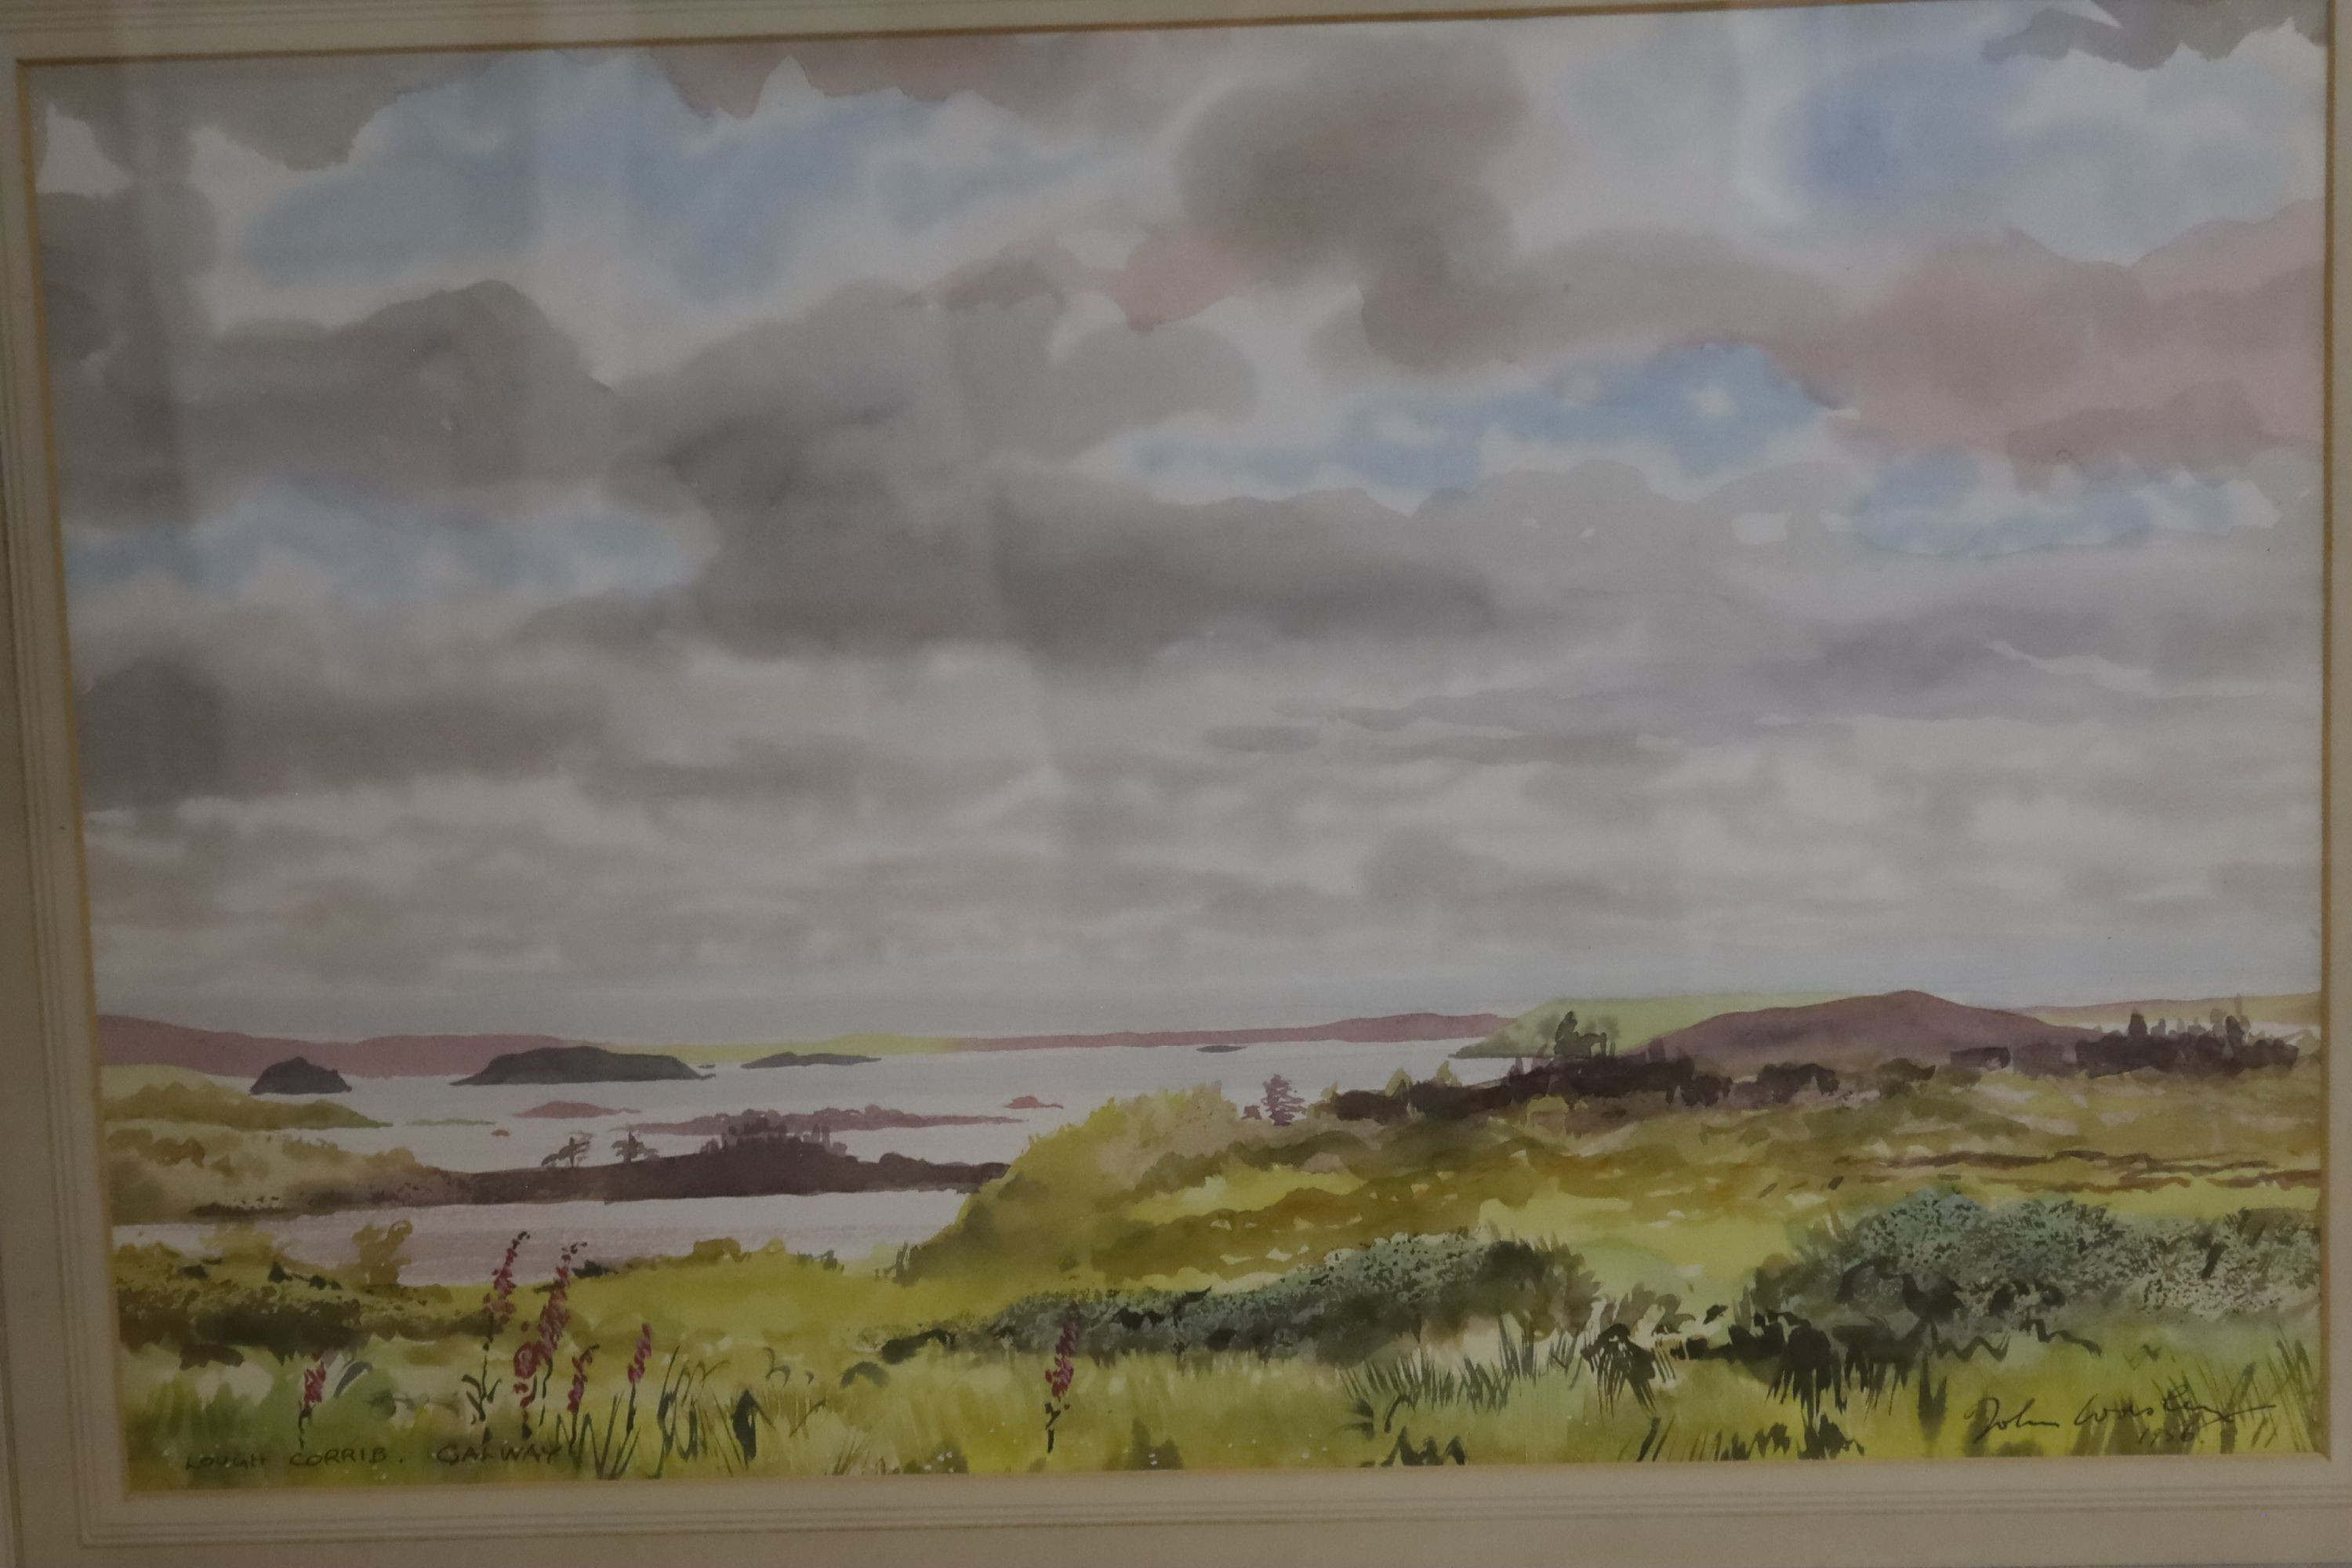 John Worsley (1919-2000), two watercolours, 'Lough Corrib, Galway' and 'Kilarney Lakes', signed, 33 x 50cm and 37 x 52cm